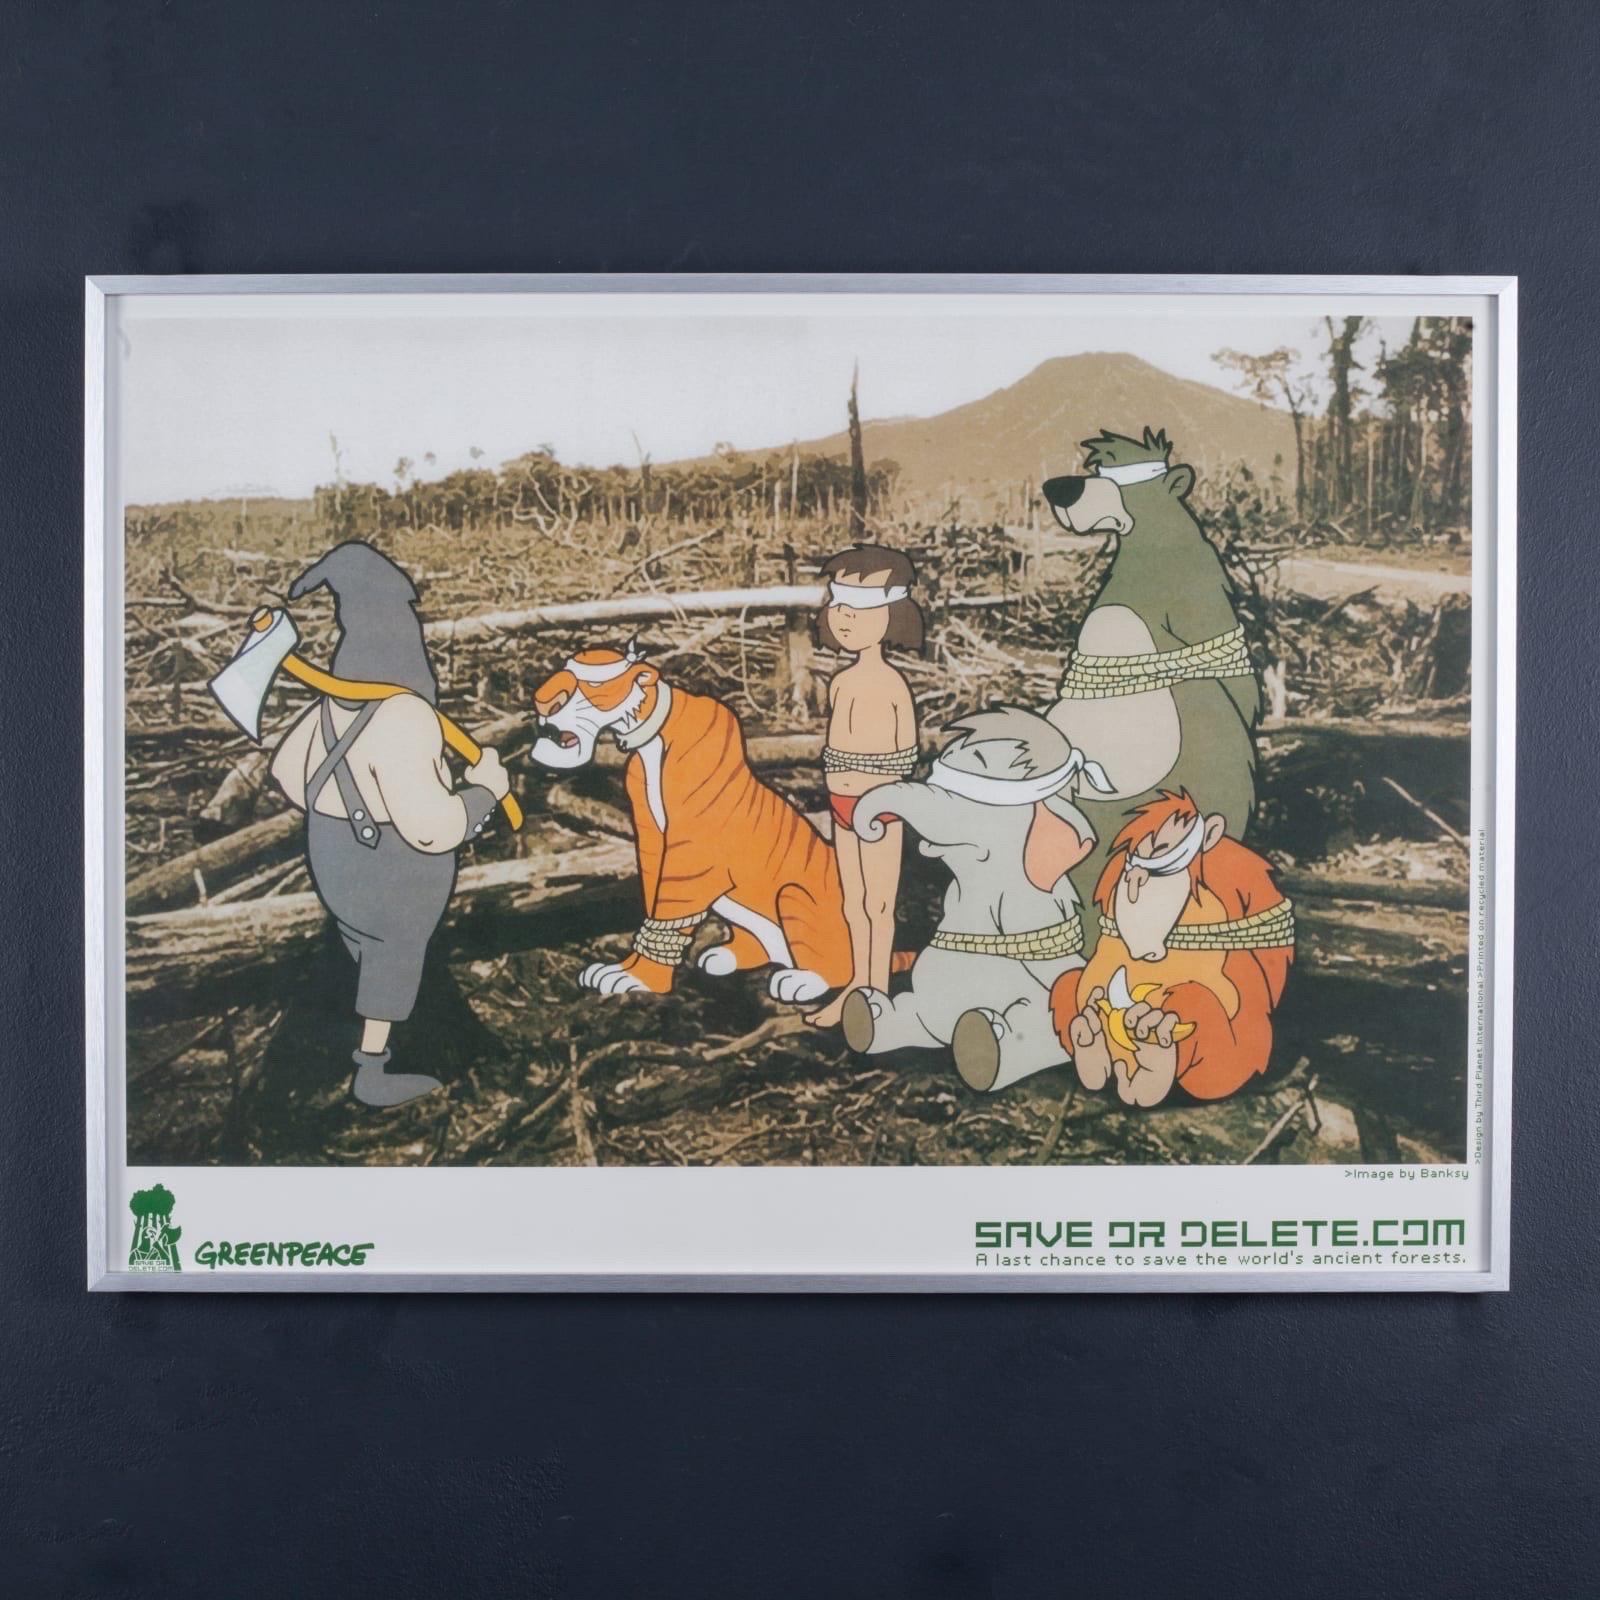 BANKSY, SAVE OR DELETE is a Poster produced by Banksy in support of Greenpeace in a last chance to save the world's rainforests. Unfortunately, the poster was banned by Disney, hence they are very rare and collectable now, and quite profound!